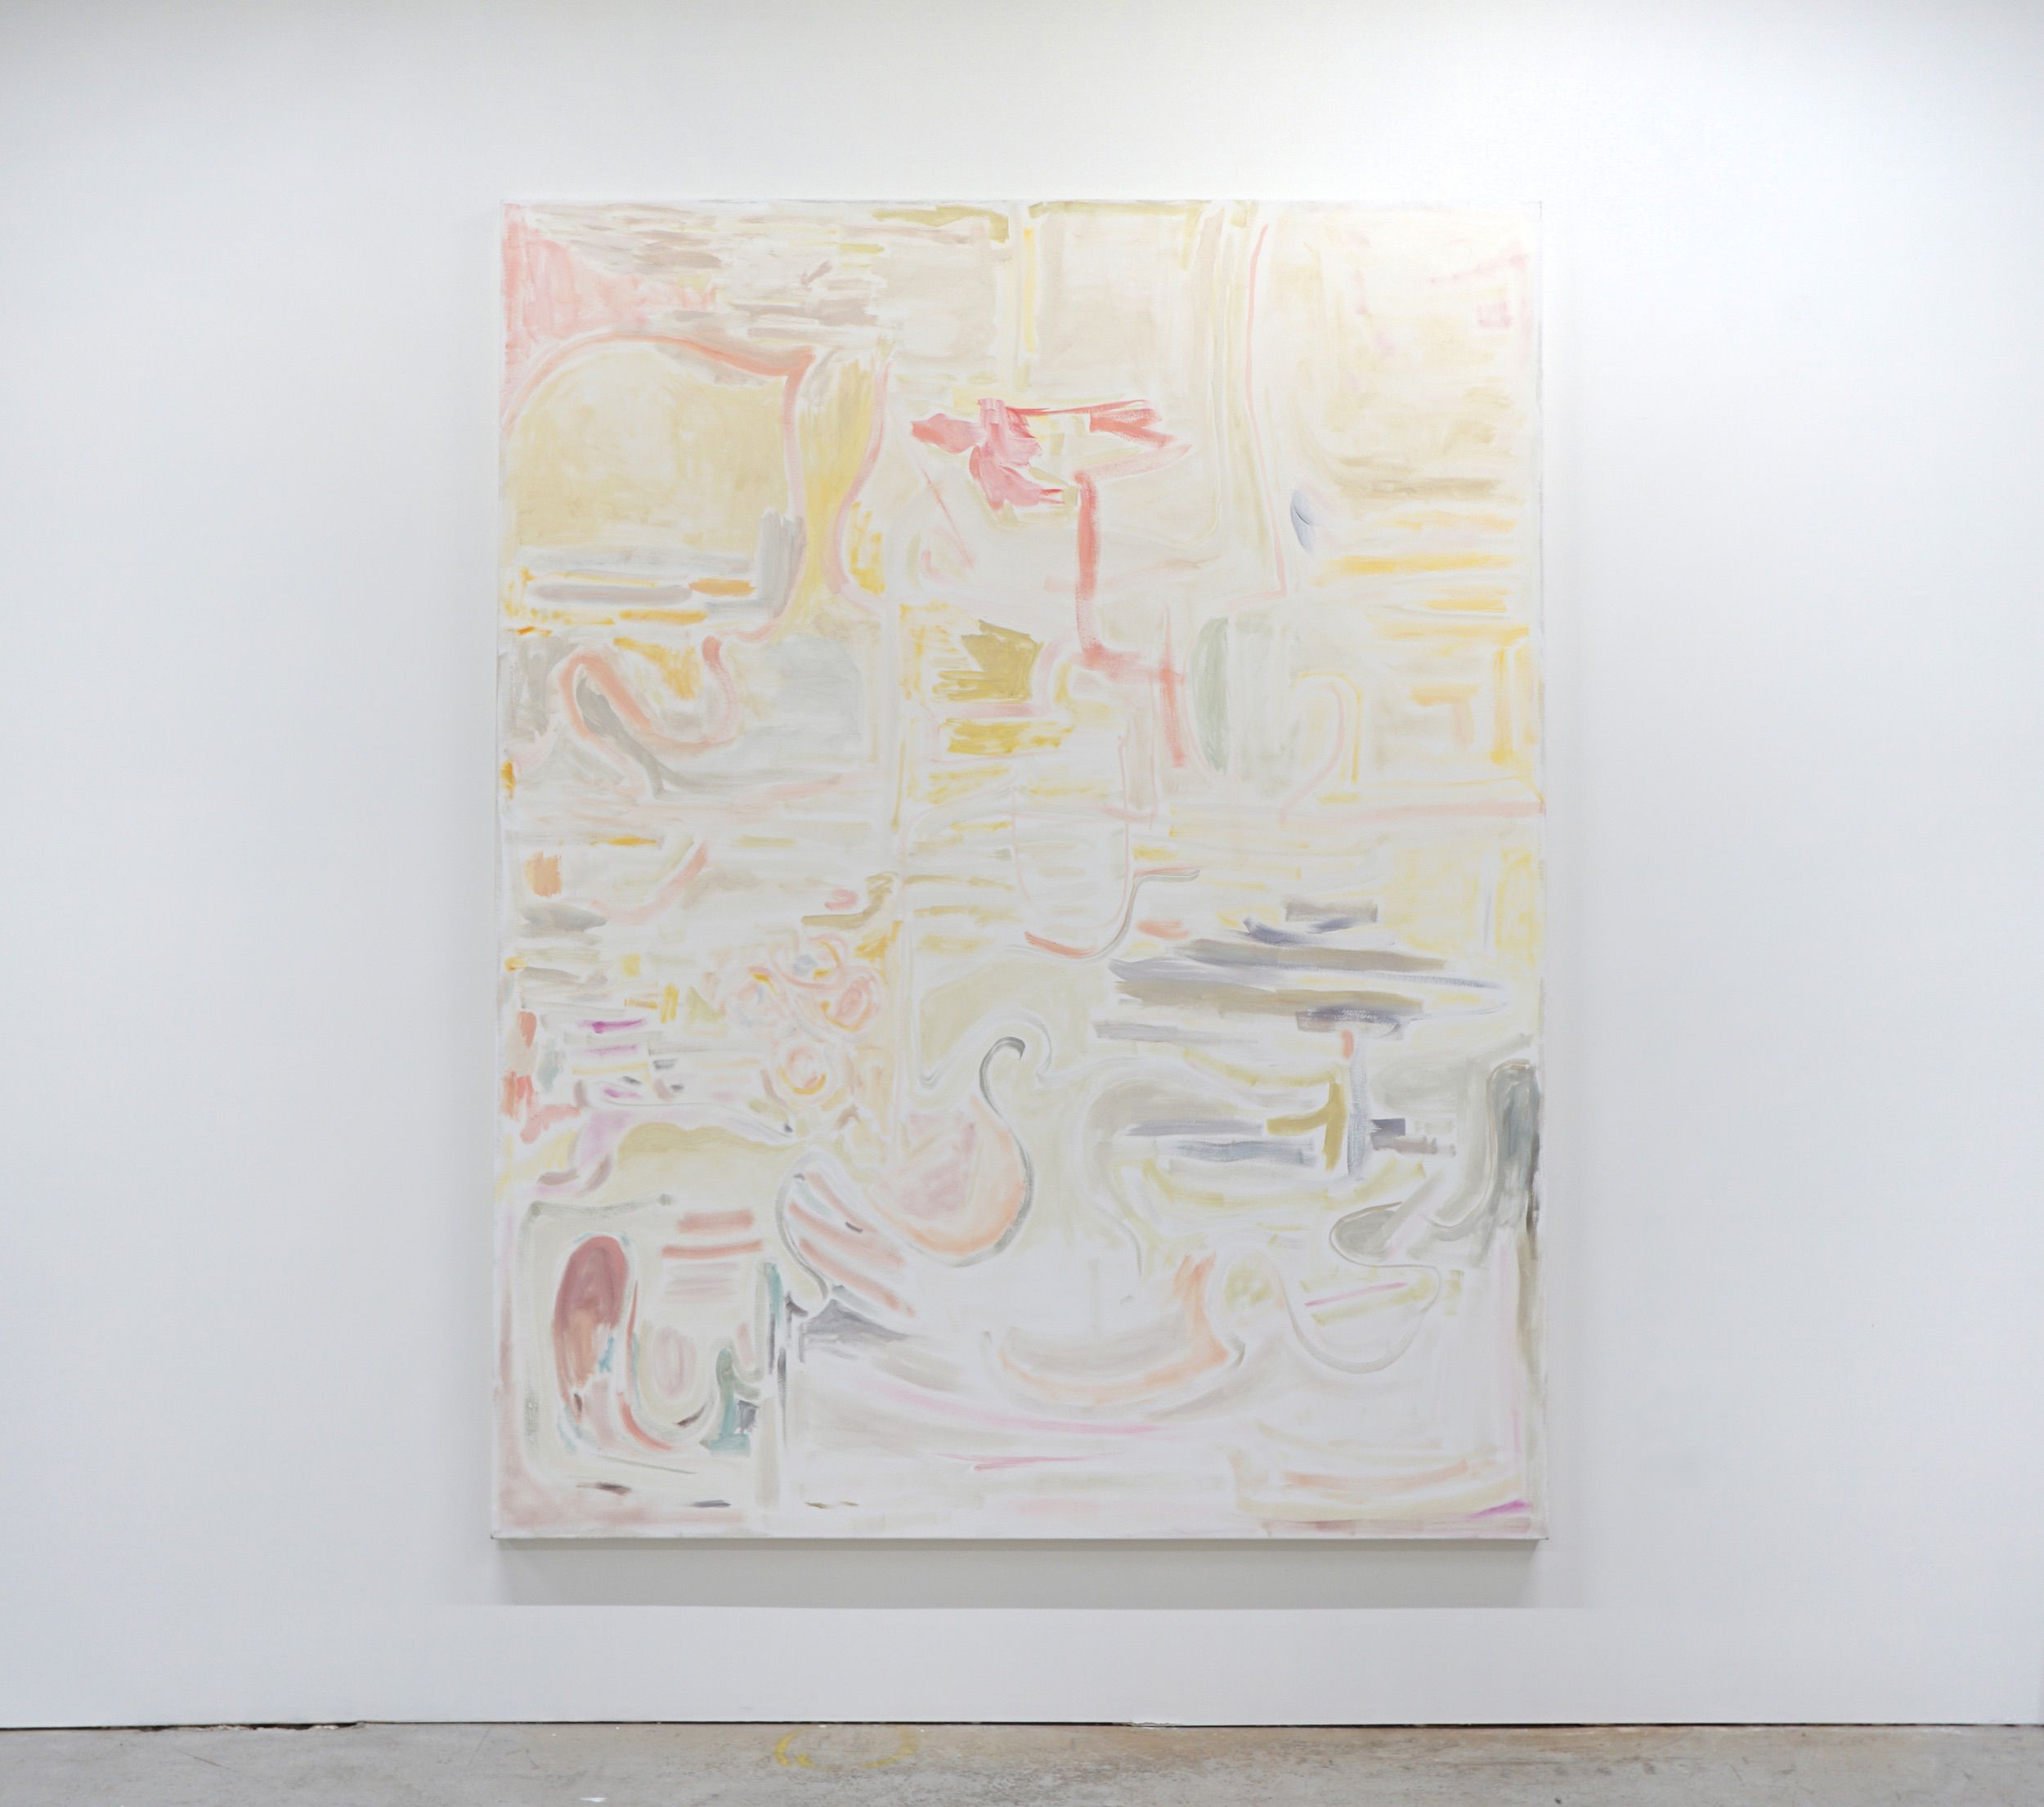  Laurie Reid  Little Sun , 2013 Oil on canvas 84 x 66 inches 